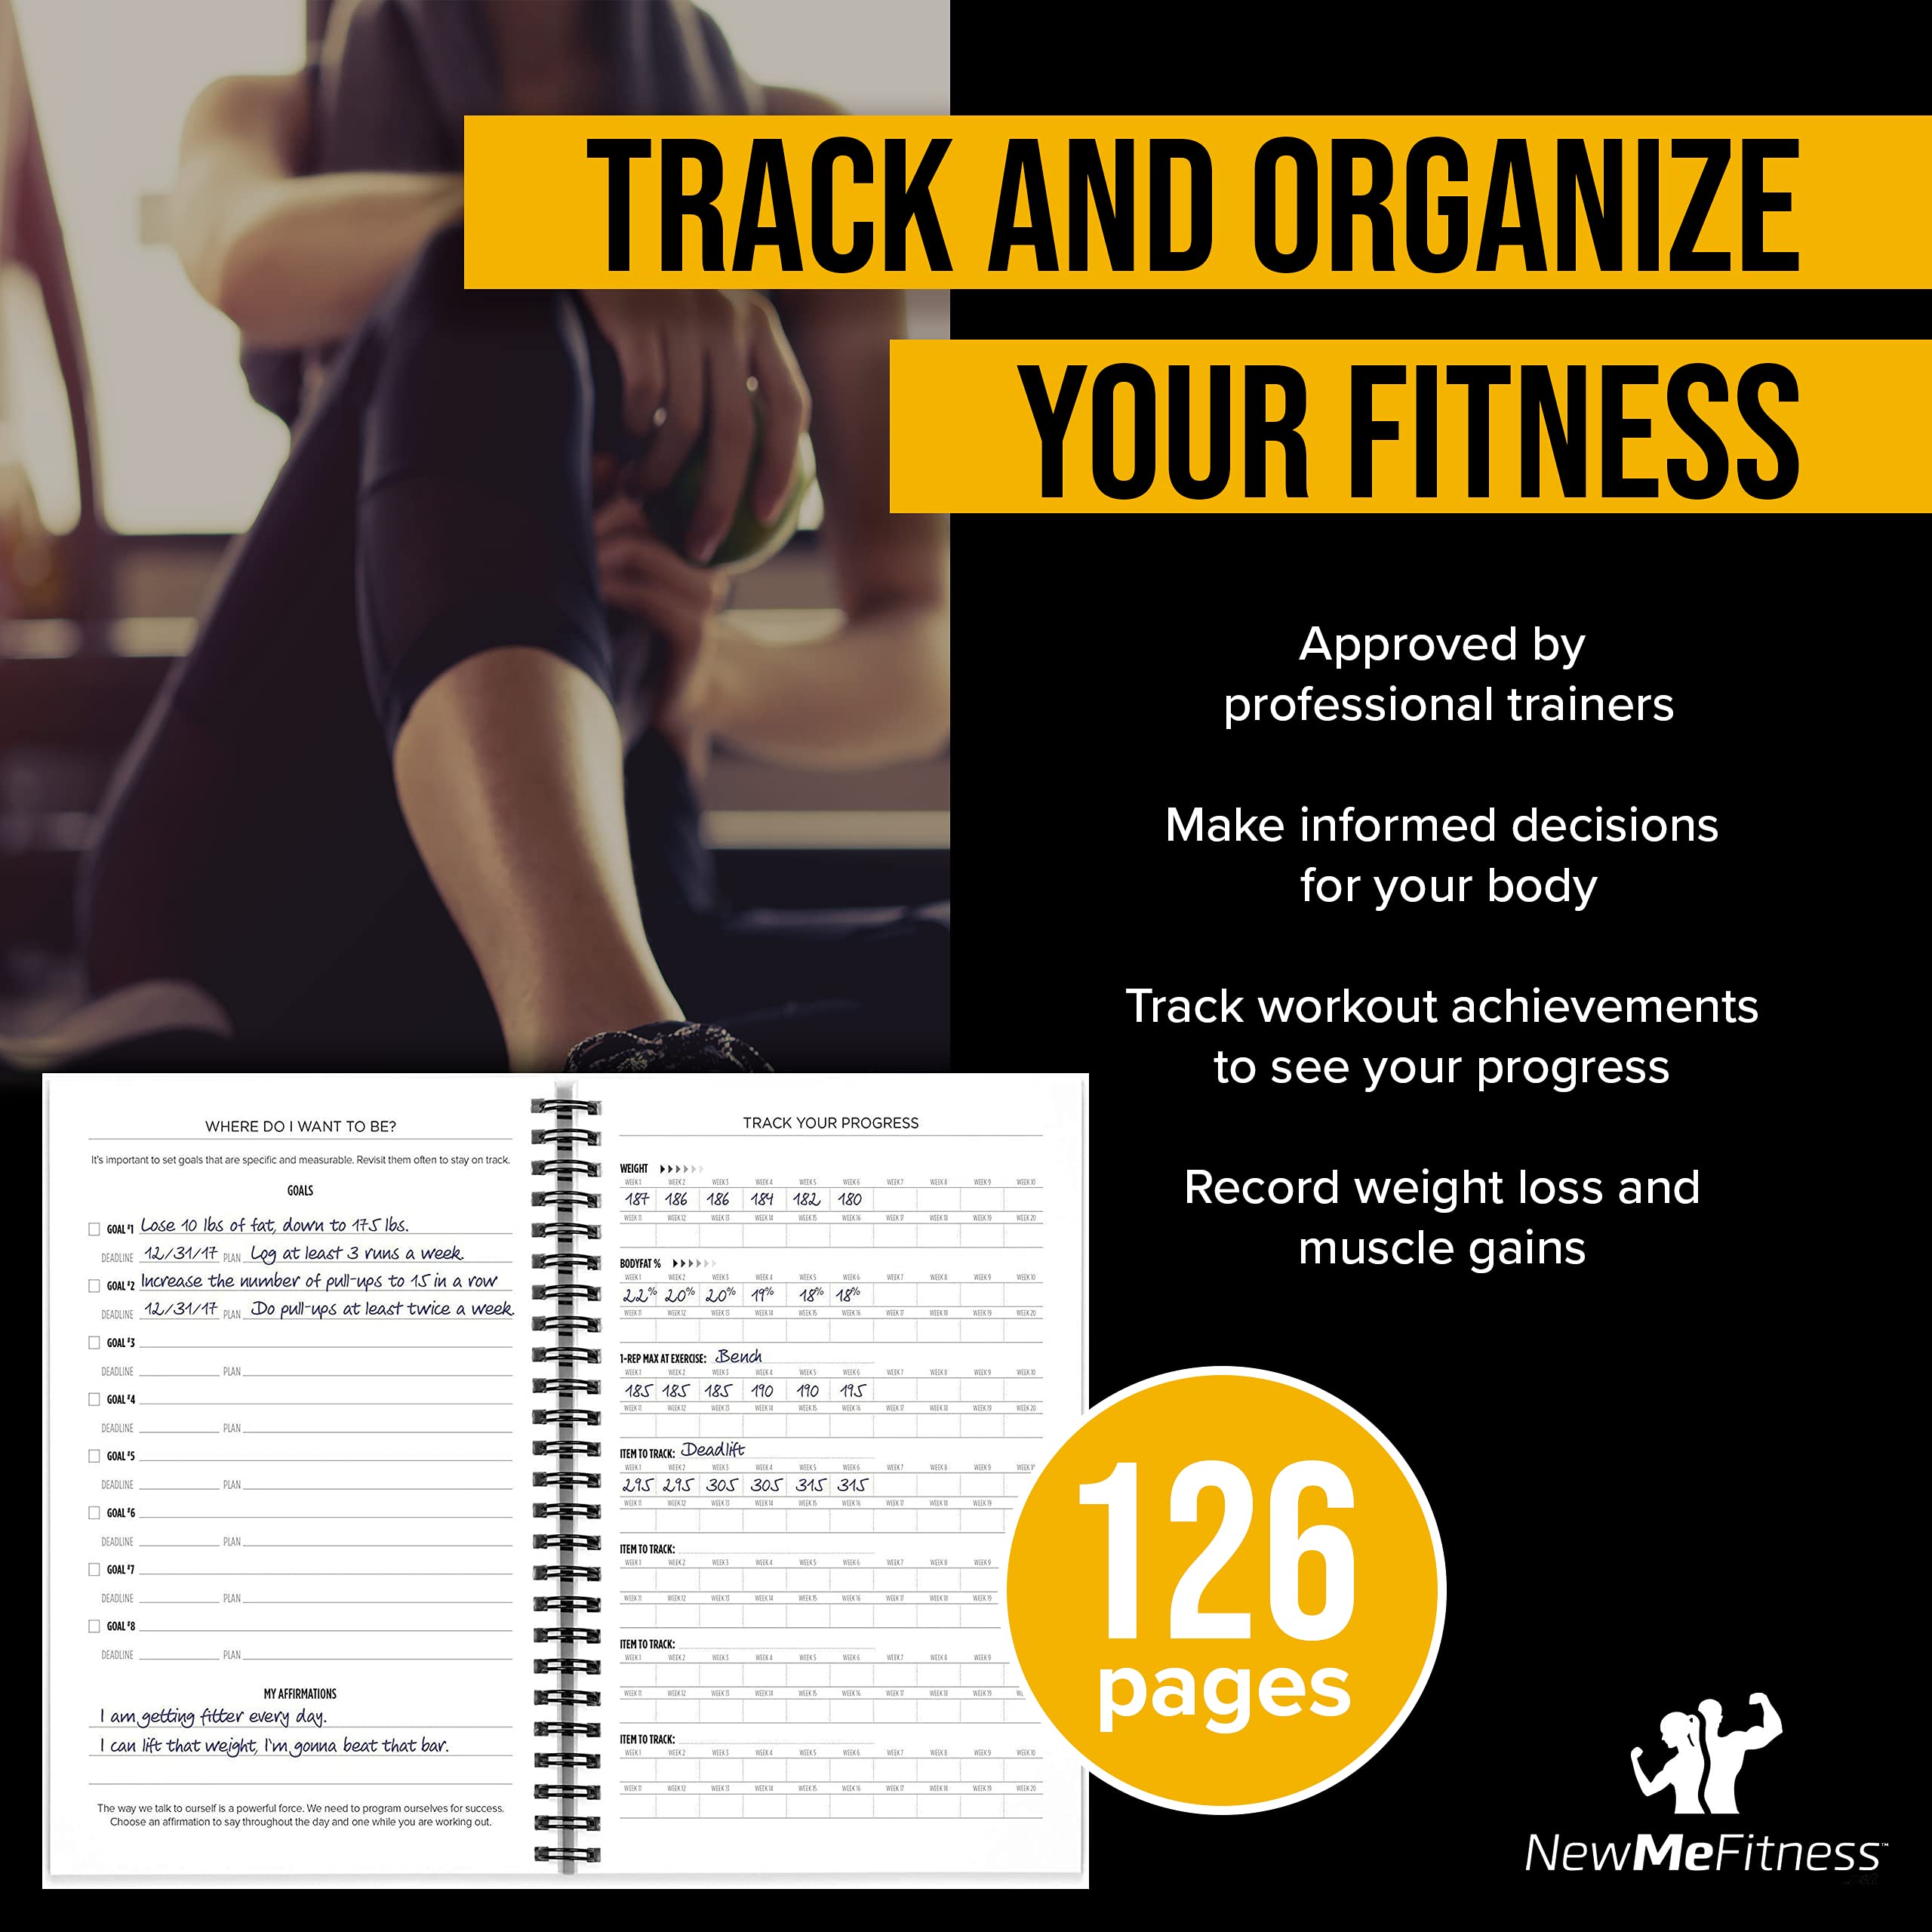 NewMe Fitness Journal for Women & Men, Food & Workout Journal, Planner Log Book to Track Weight Loss, Muscle Gain, Home Gym Exercise, Bodybuilding Progress, Daily Nutrition & Personal Health Tracker